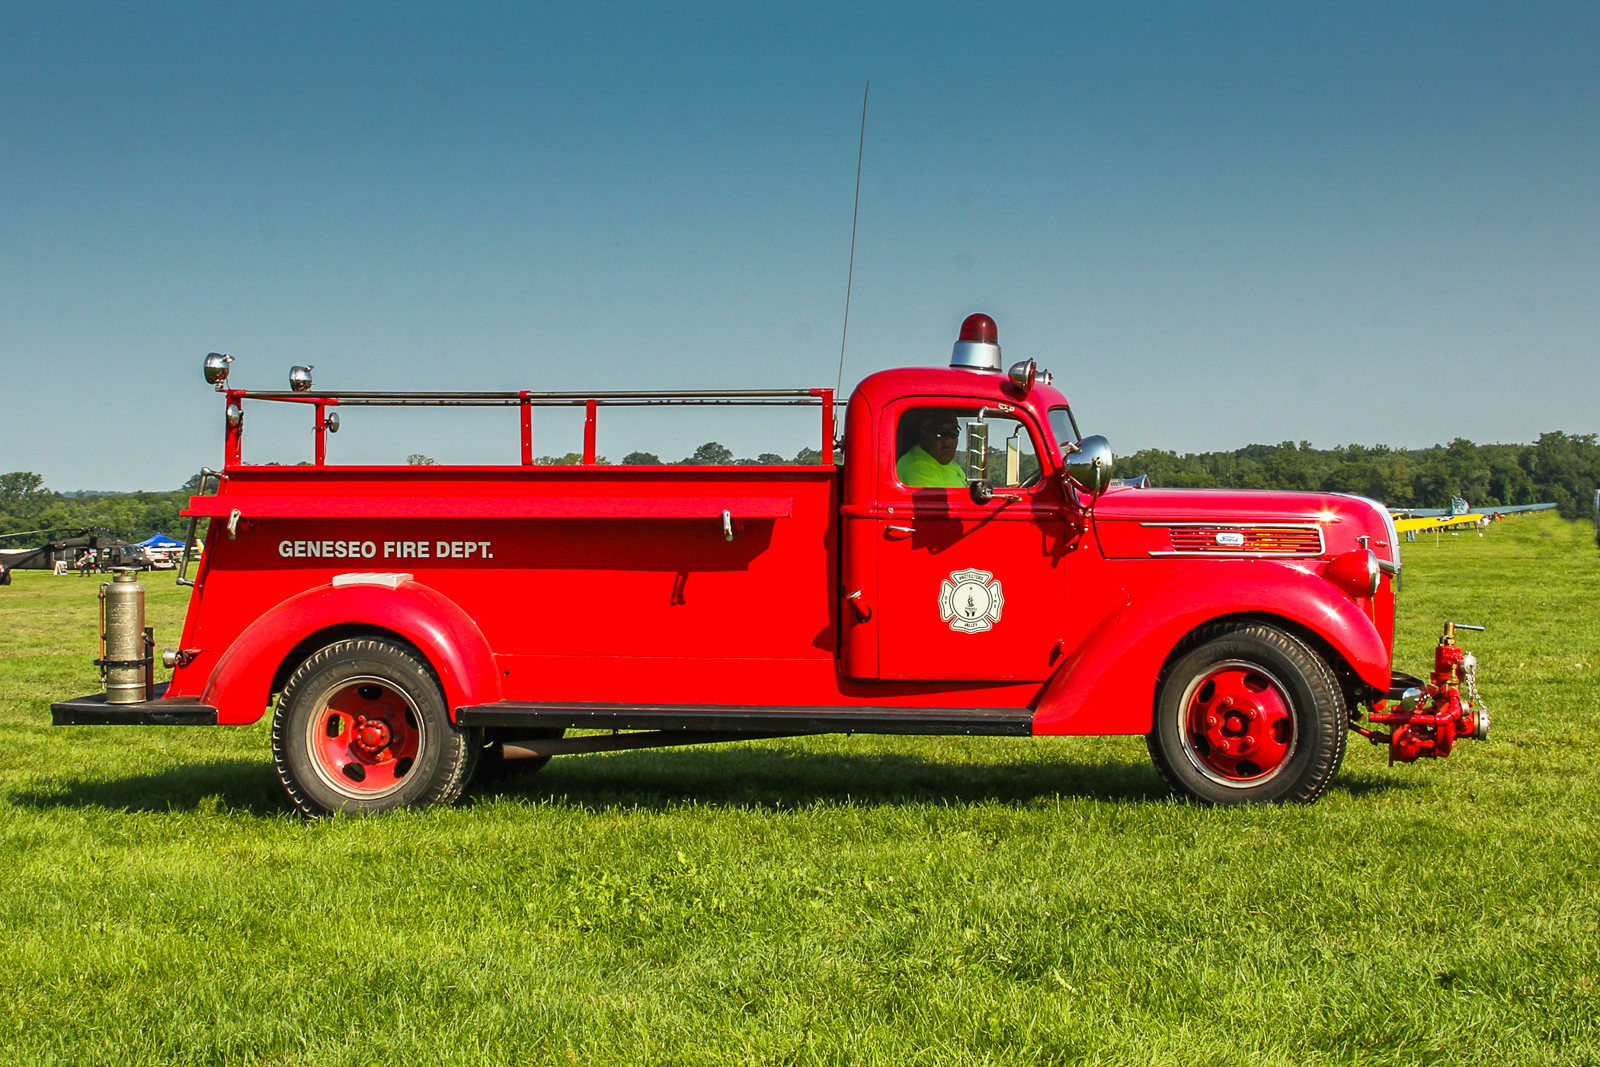 1939 Ford fire truck; one of several vintage firefighting vehicles on display. (photo by Tom Pawlesh)